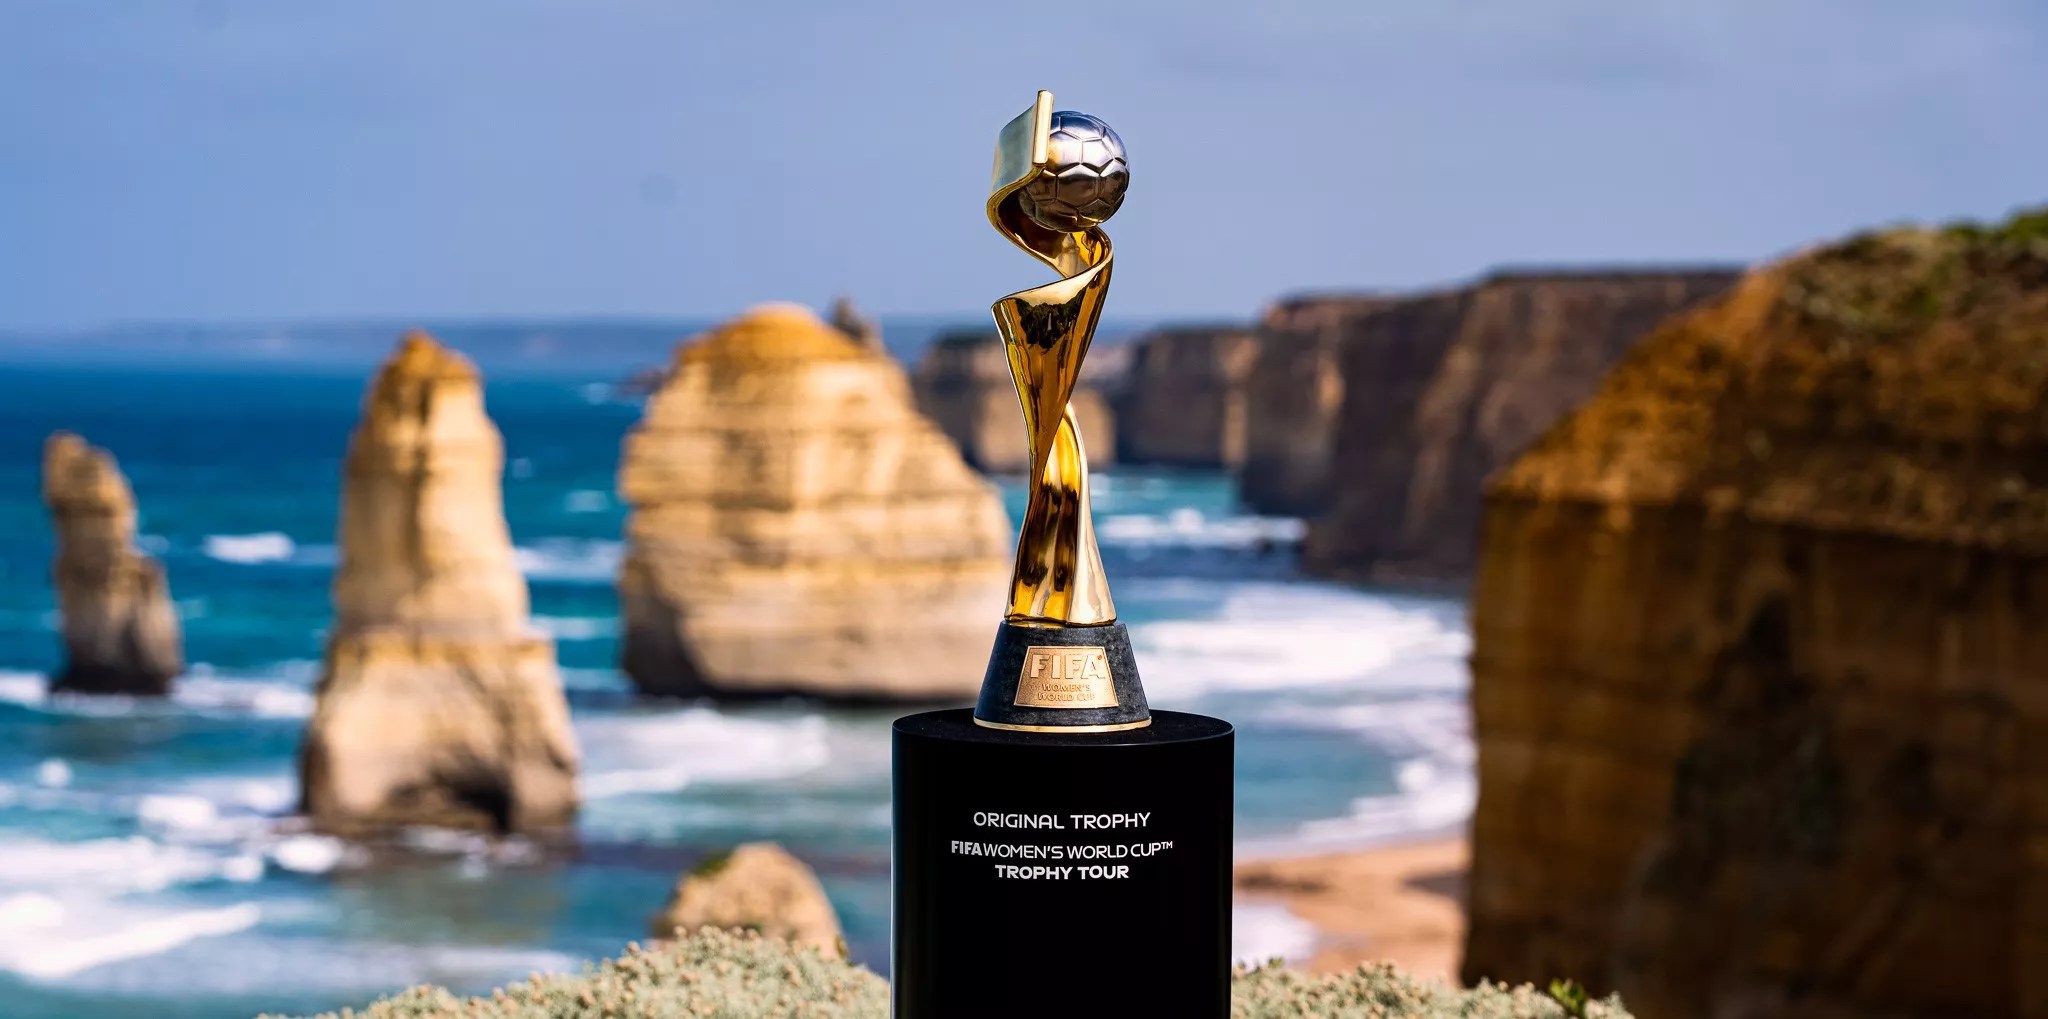 Governments of UK, Germany, Spain, France, and Italy have pushed broadcasters for FIFA Women's World Cup 2023 Broadcast rights